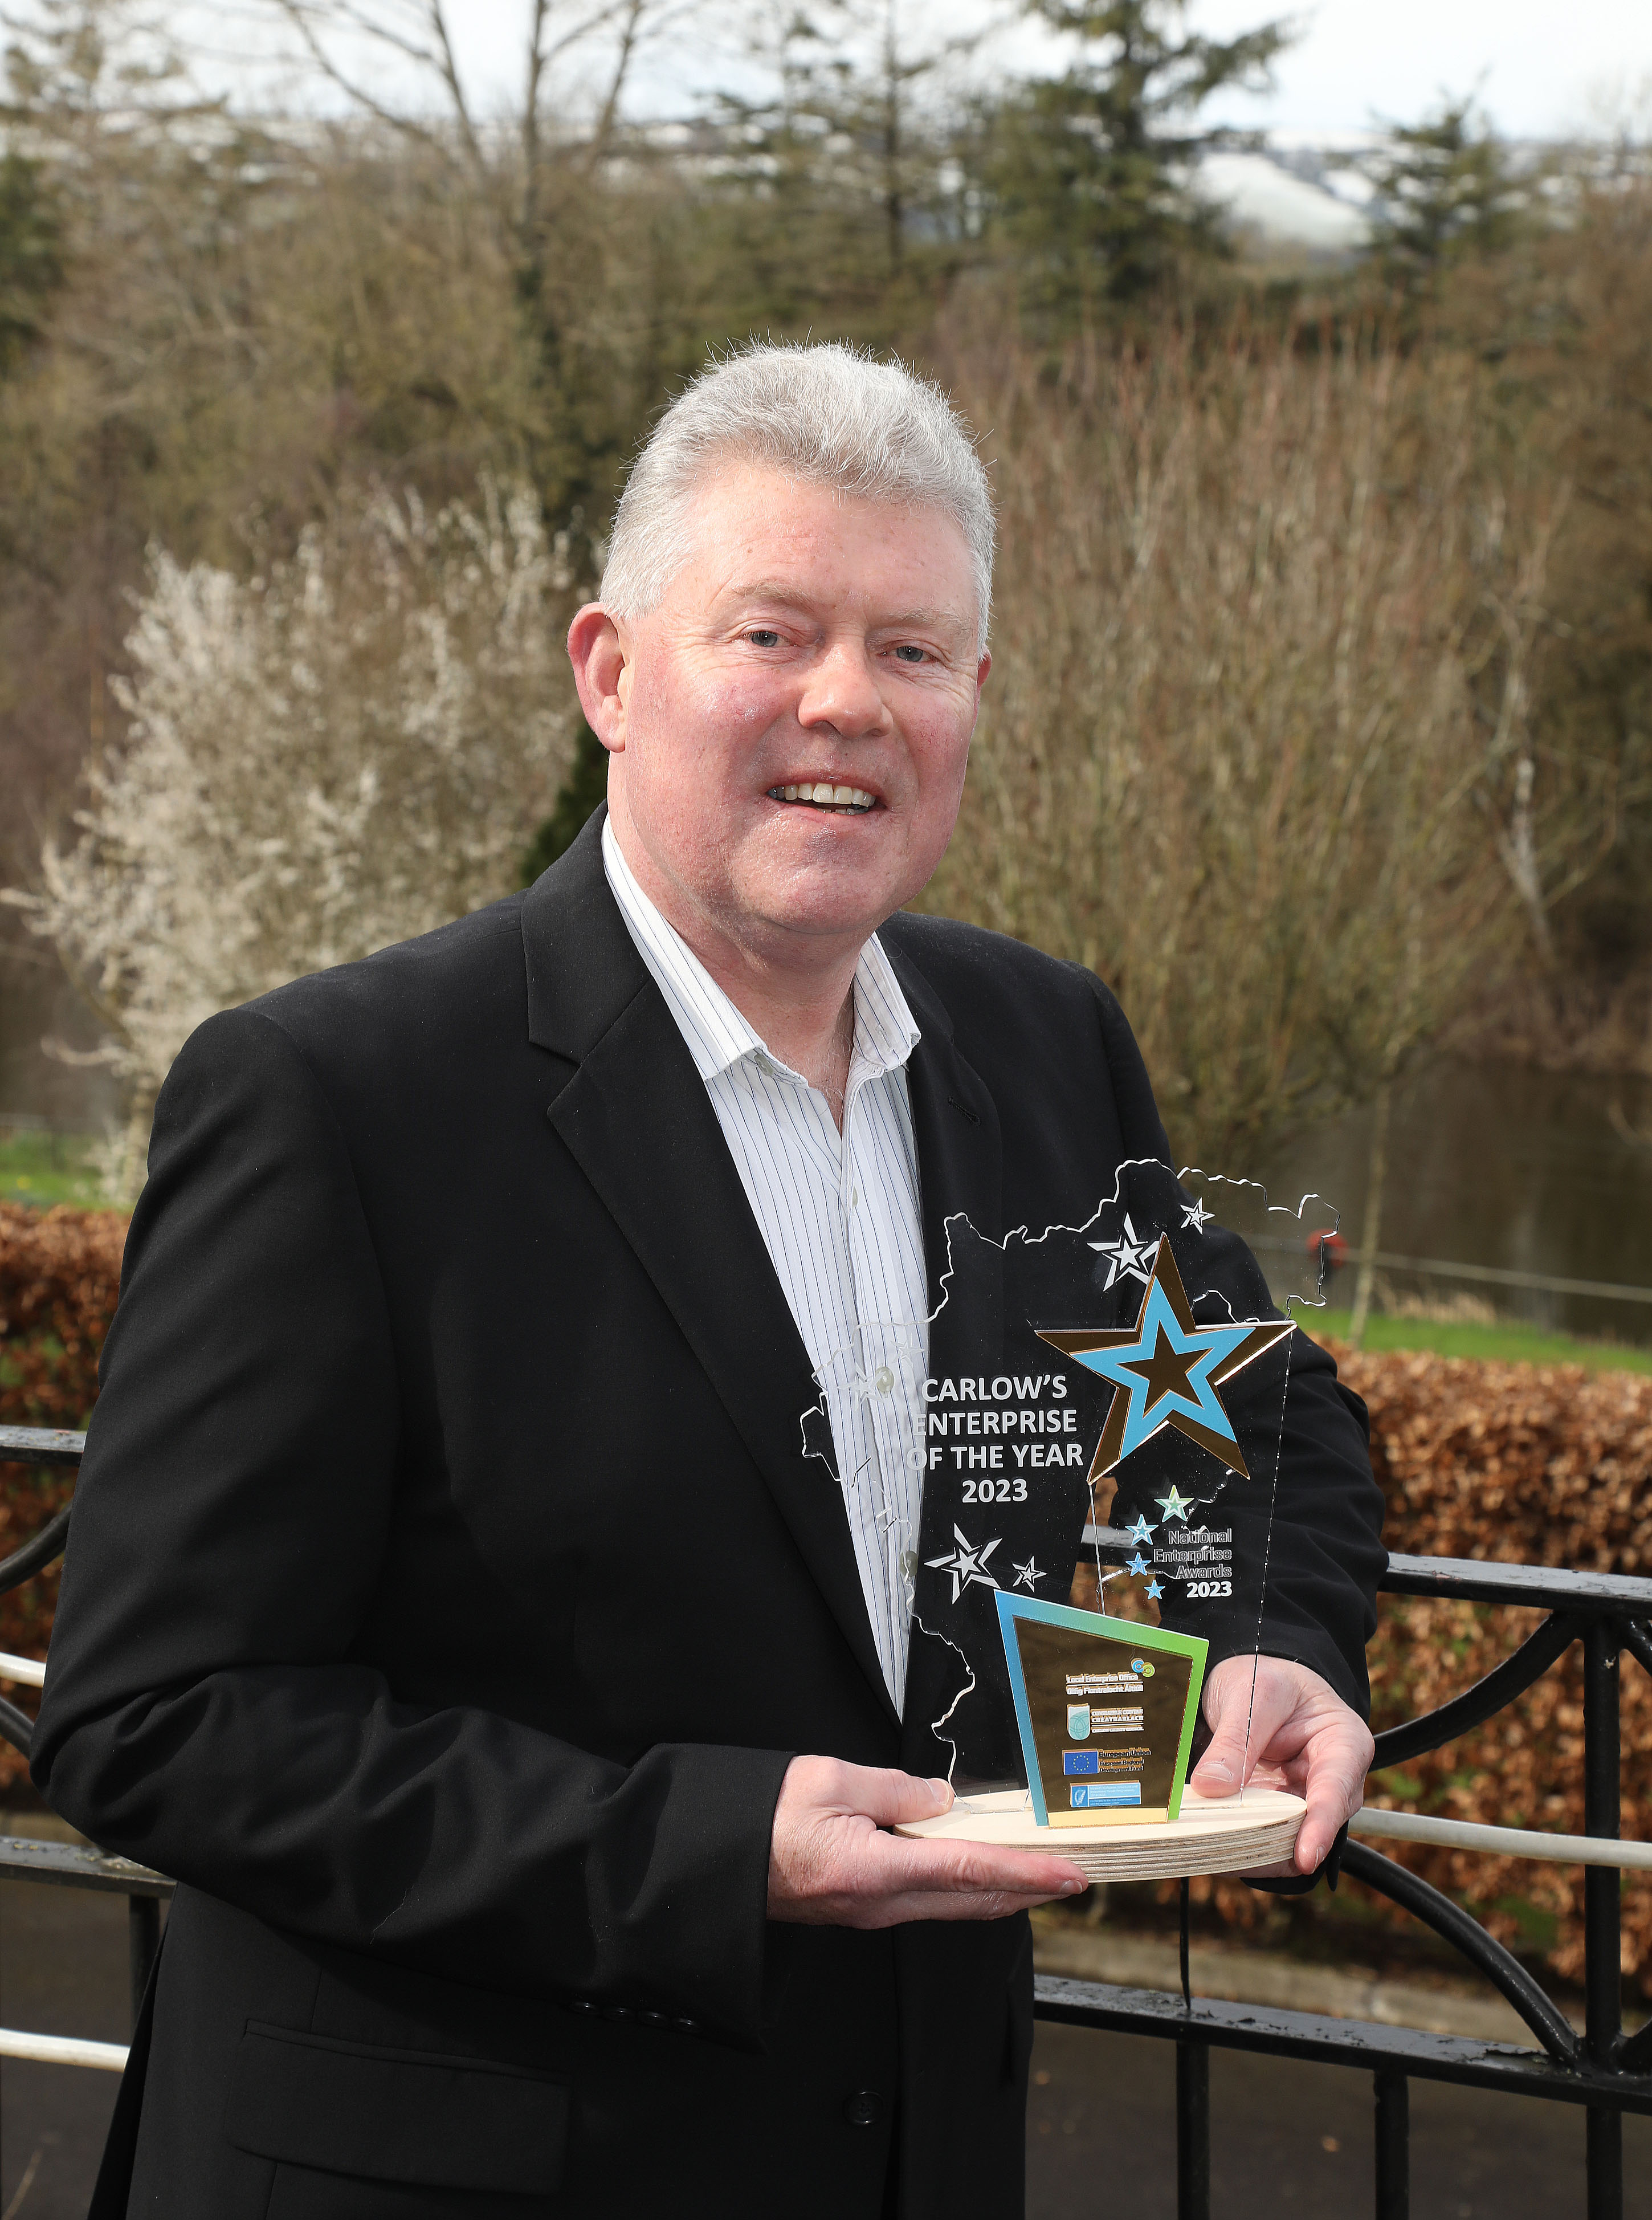  CARLOW BUSINESS ANNOUNCED FOR NATIONAL ENTERPRISE AWARDS FINAL